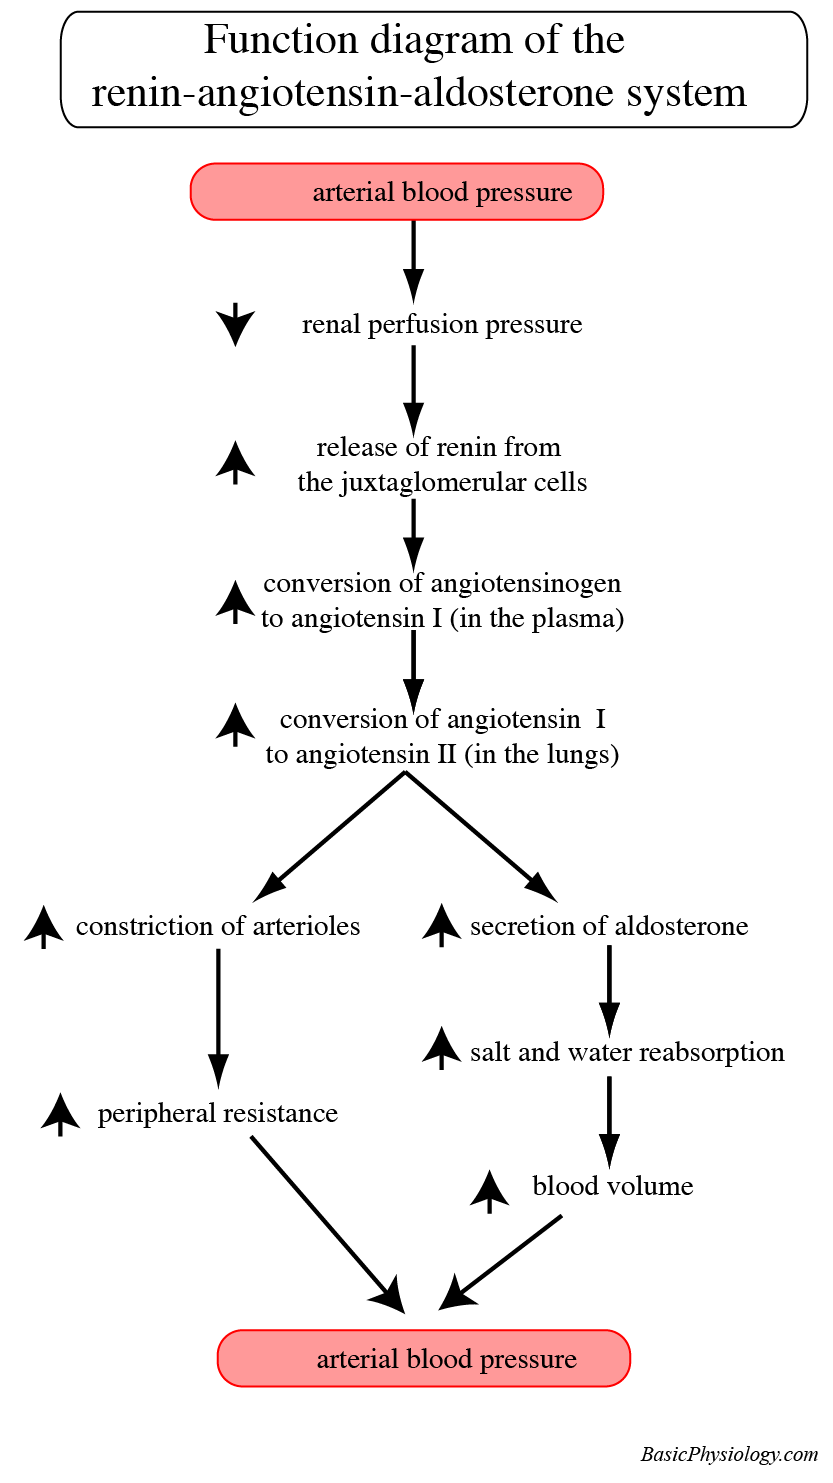 diagram of the function of the renin-angiotensin-aldosterone system